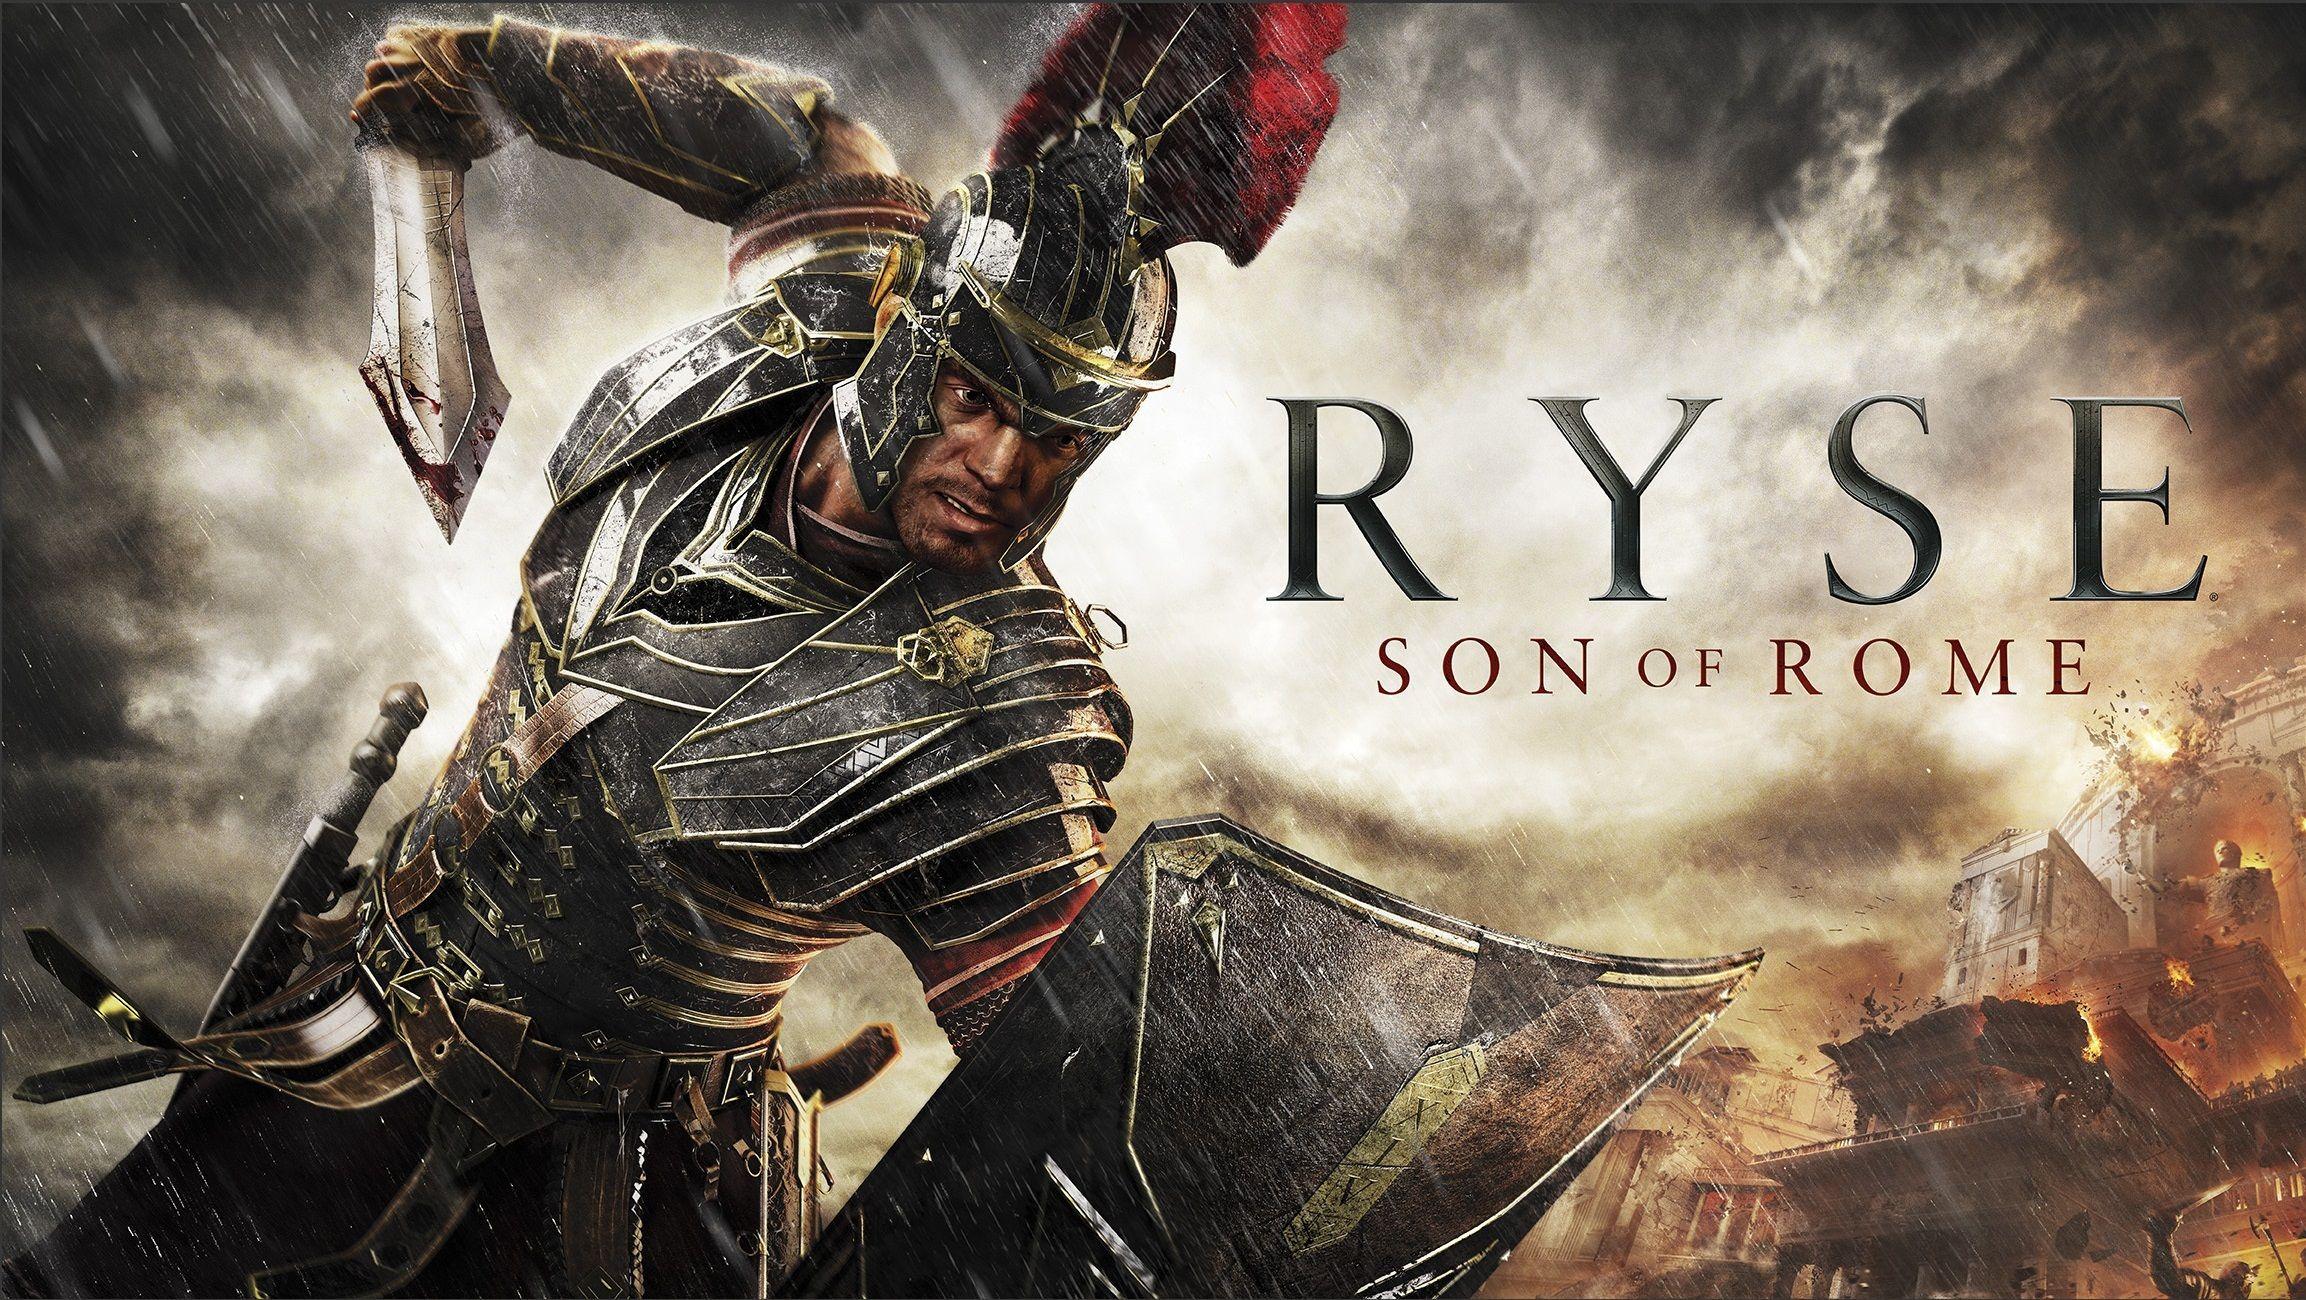 Ryse Son of Rome wallpapers 3